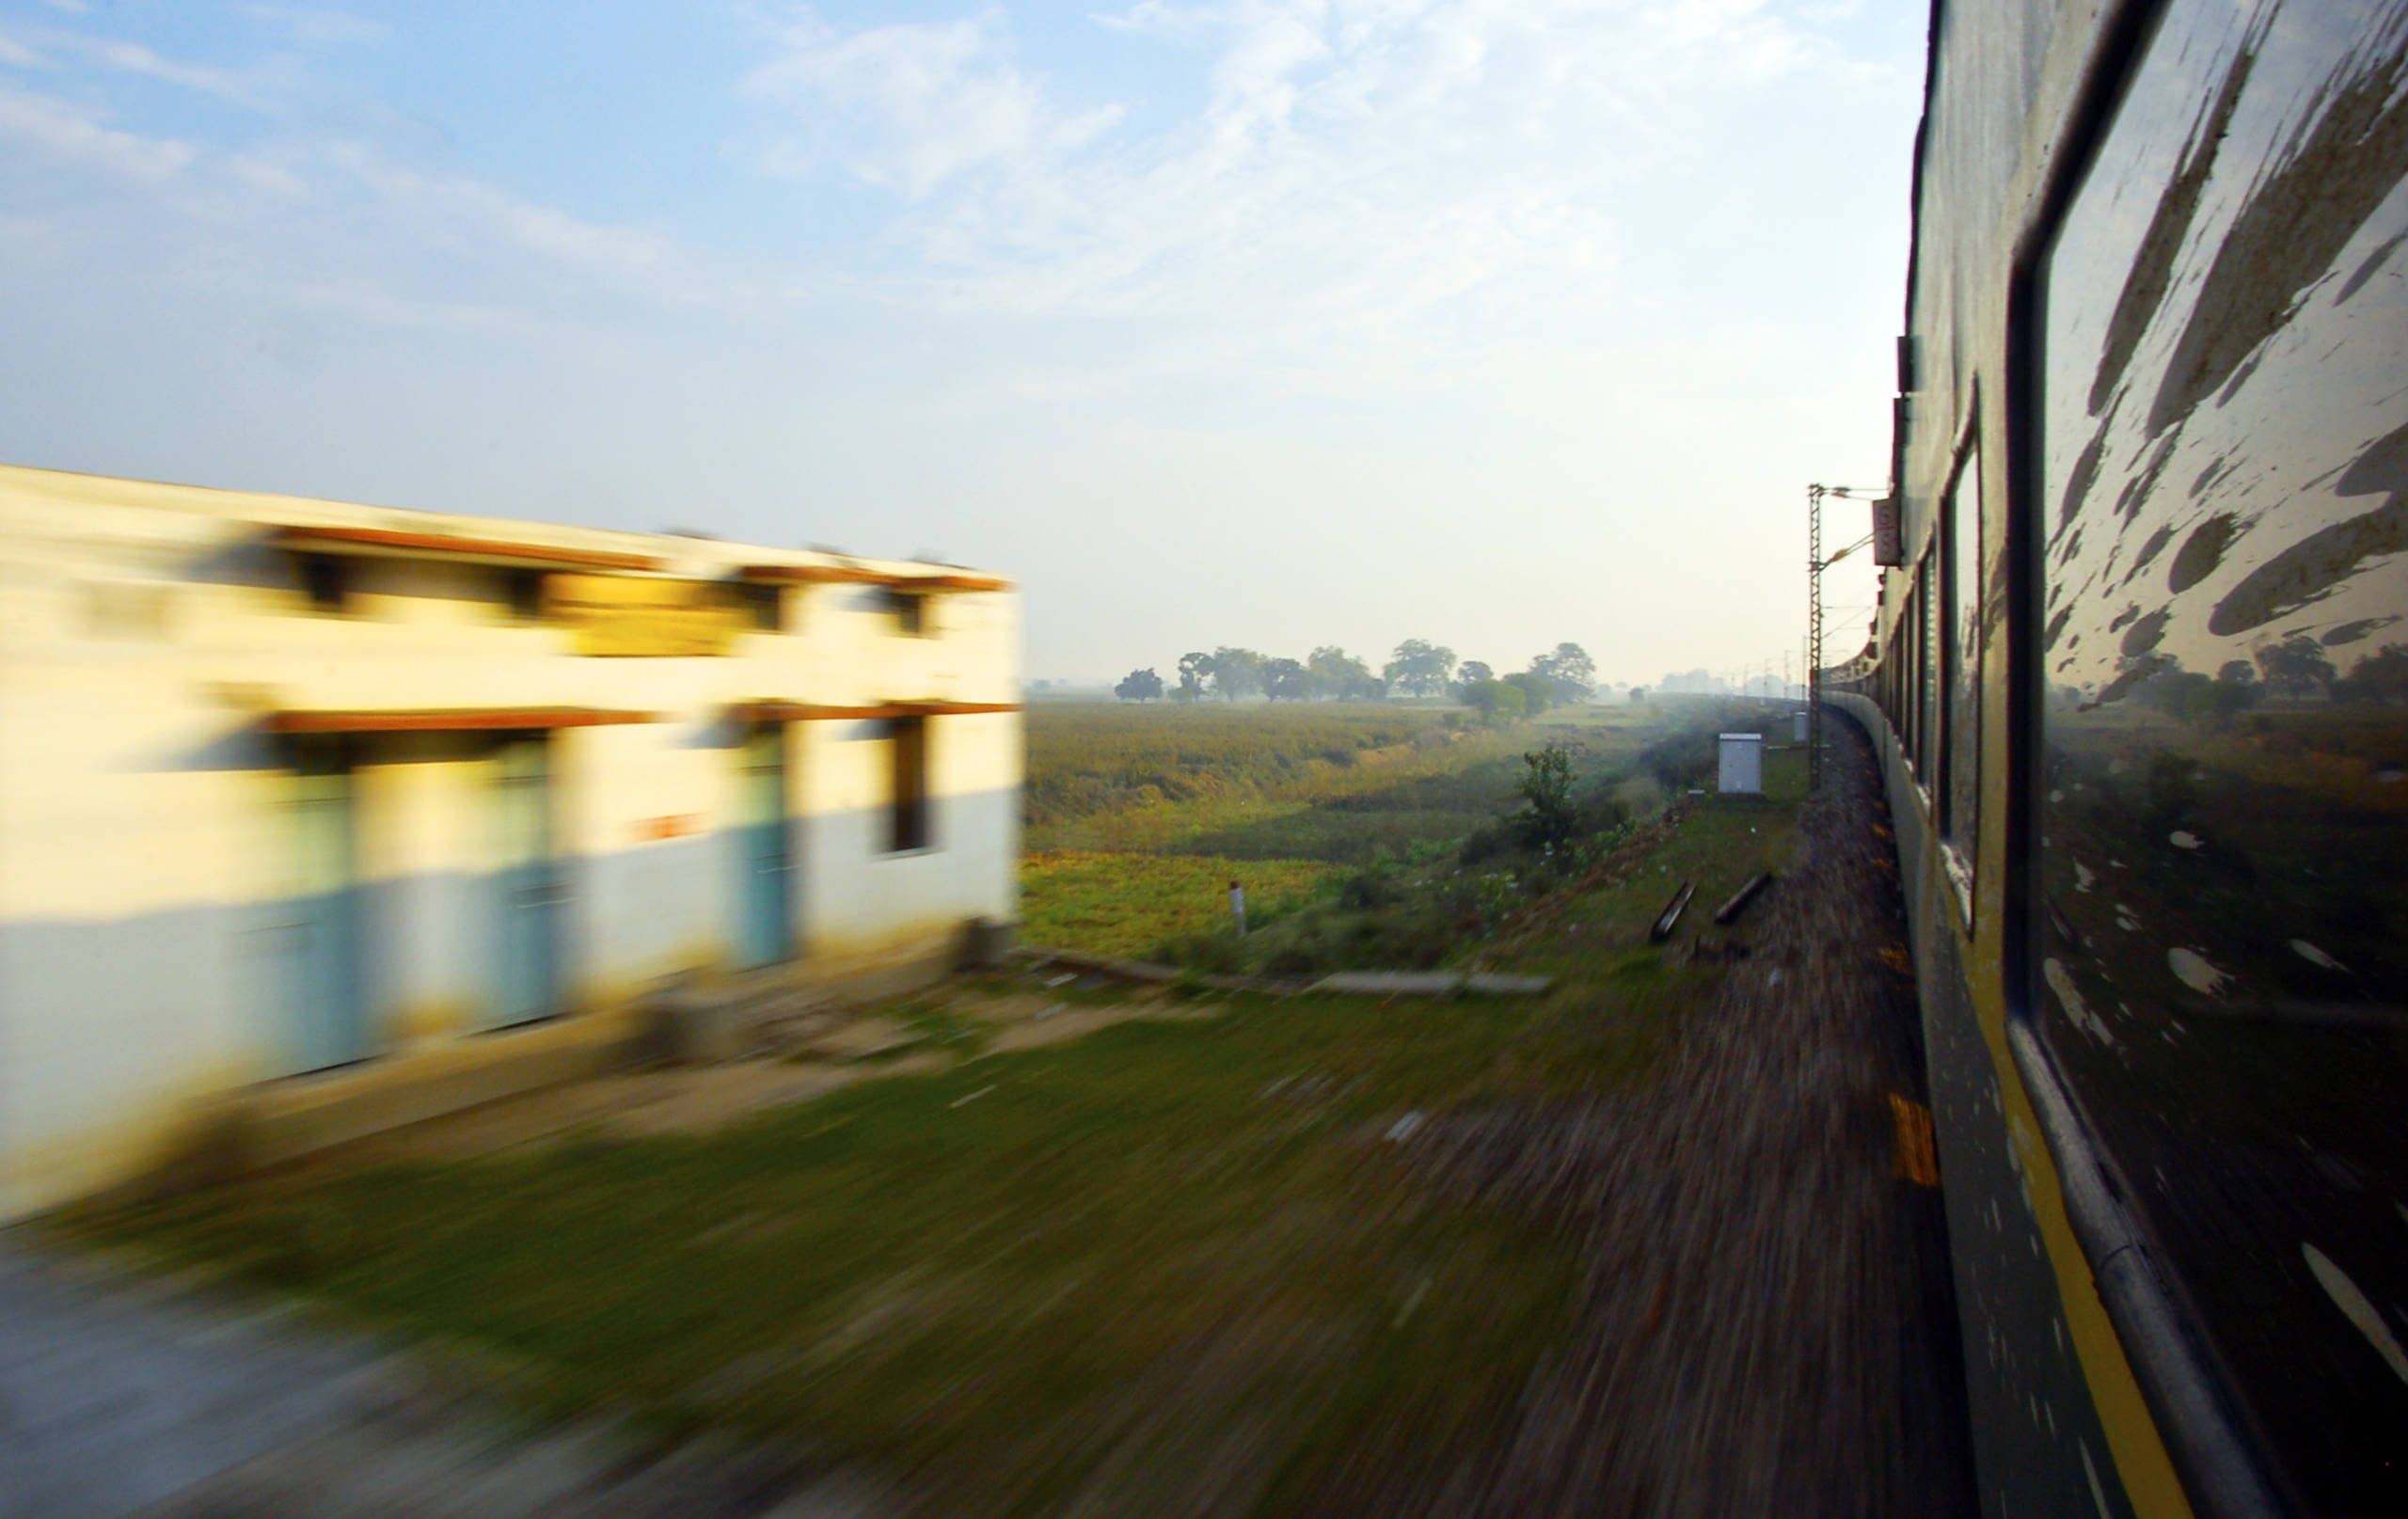 "This photo was taken during sunrise on an overnight train from New Delhi to Varanasi. The sun was rising from the opposite side and I thought it was interesting to see the dramatic shadow the train cast. The most difficult part was making sure my camera didn't venture too far out and get hit by the electrical poles whizzing by!" -Josh Liberman from the University of Miami